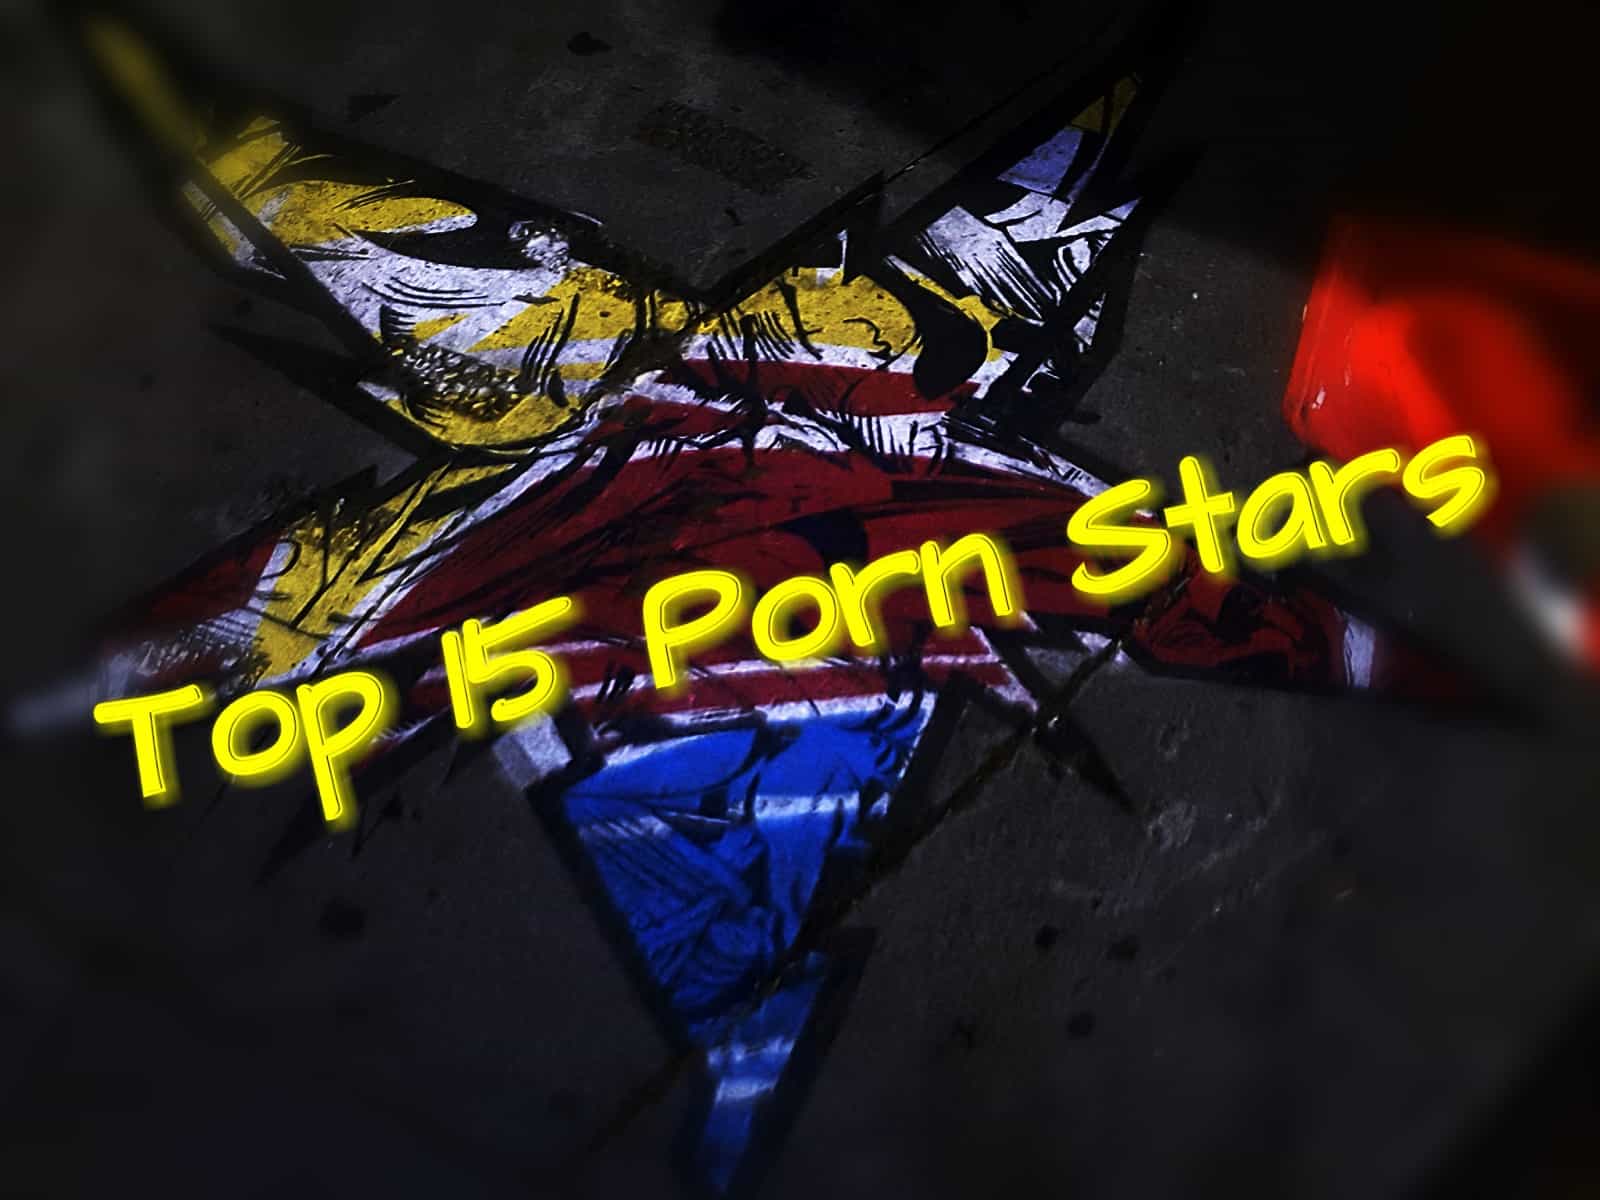 The Top 15 Porn Stars Today - The Hareald